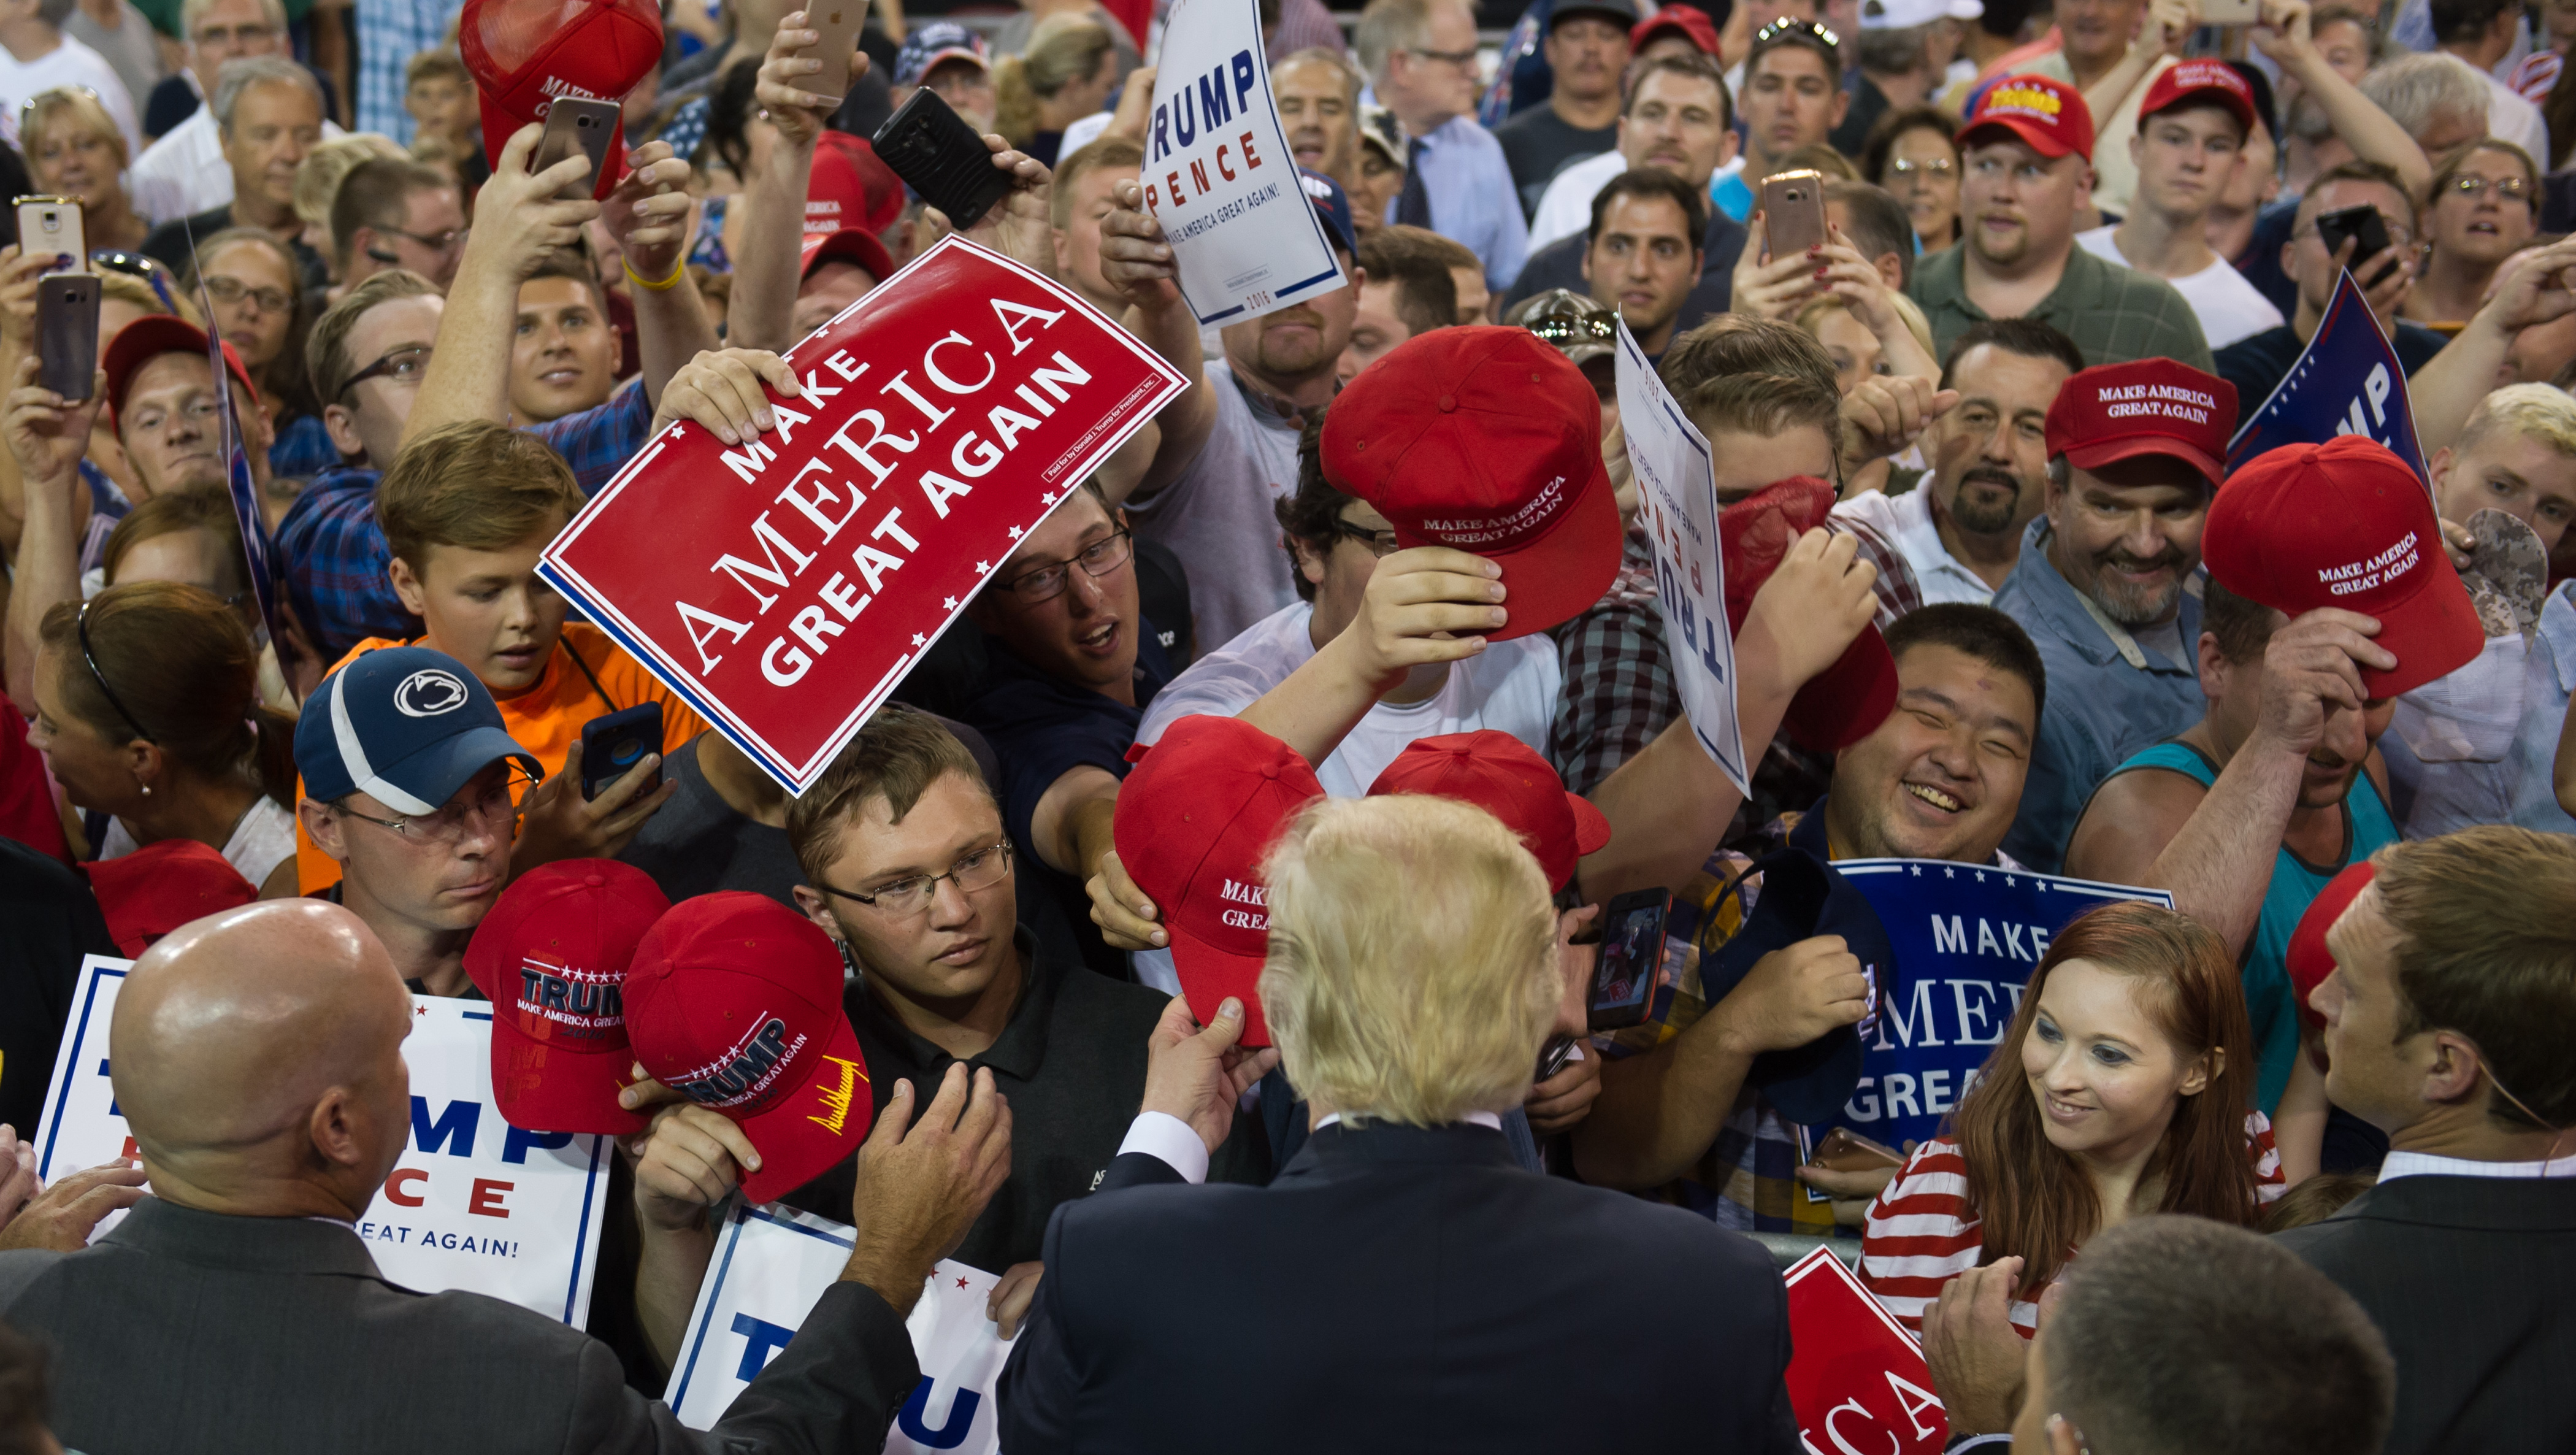 Republican candidate for President Donald Trump speaks to supporters at a rally at Erie Insurance Arena in Erie, Penn., on Aug. 12, 2016.